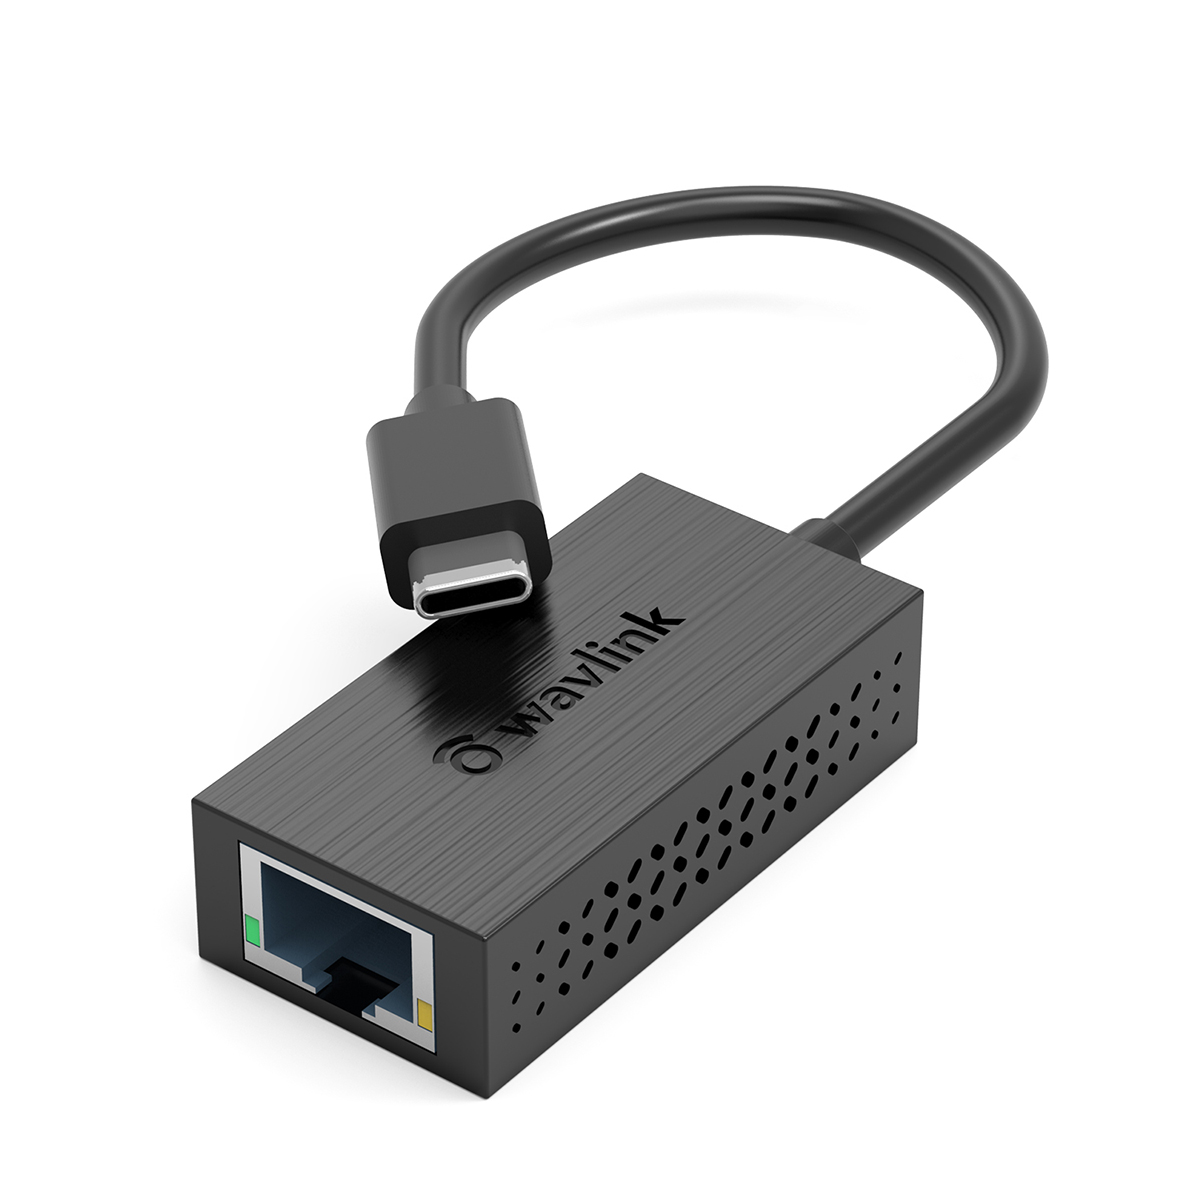 Find WAVLINK USB 3 1 Type C/USB3 0 to Gigabit Ethernet Adapter USB3 0 to LAN RJ45 Port Converter 5Gbps Network Connector for Sale on Gipsybee.com with cryptocurrencies